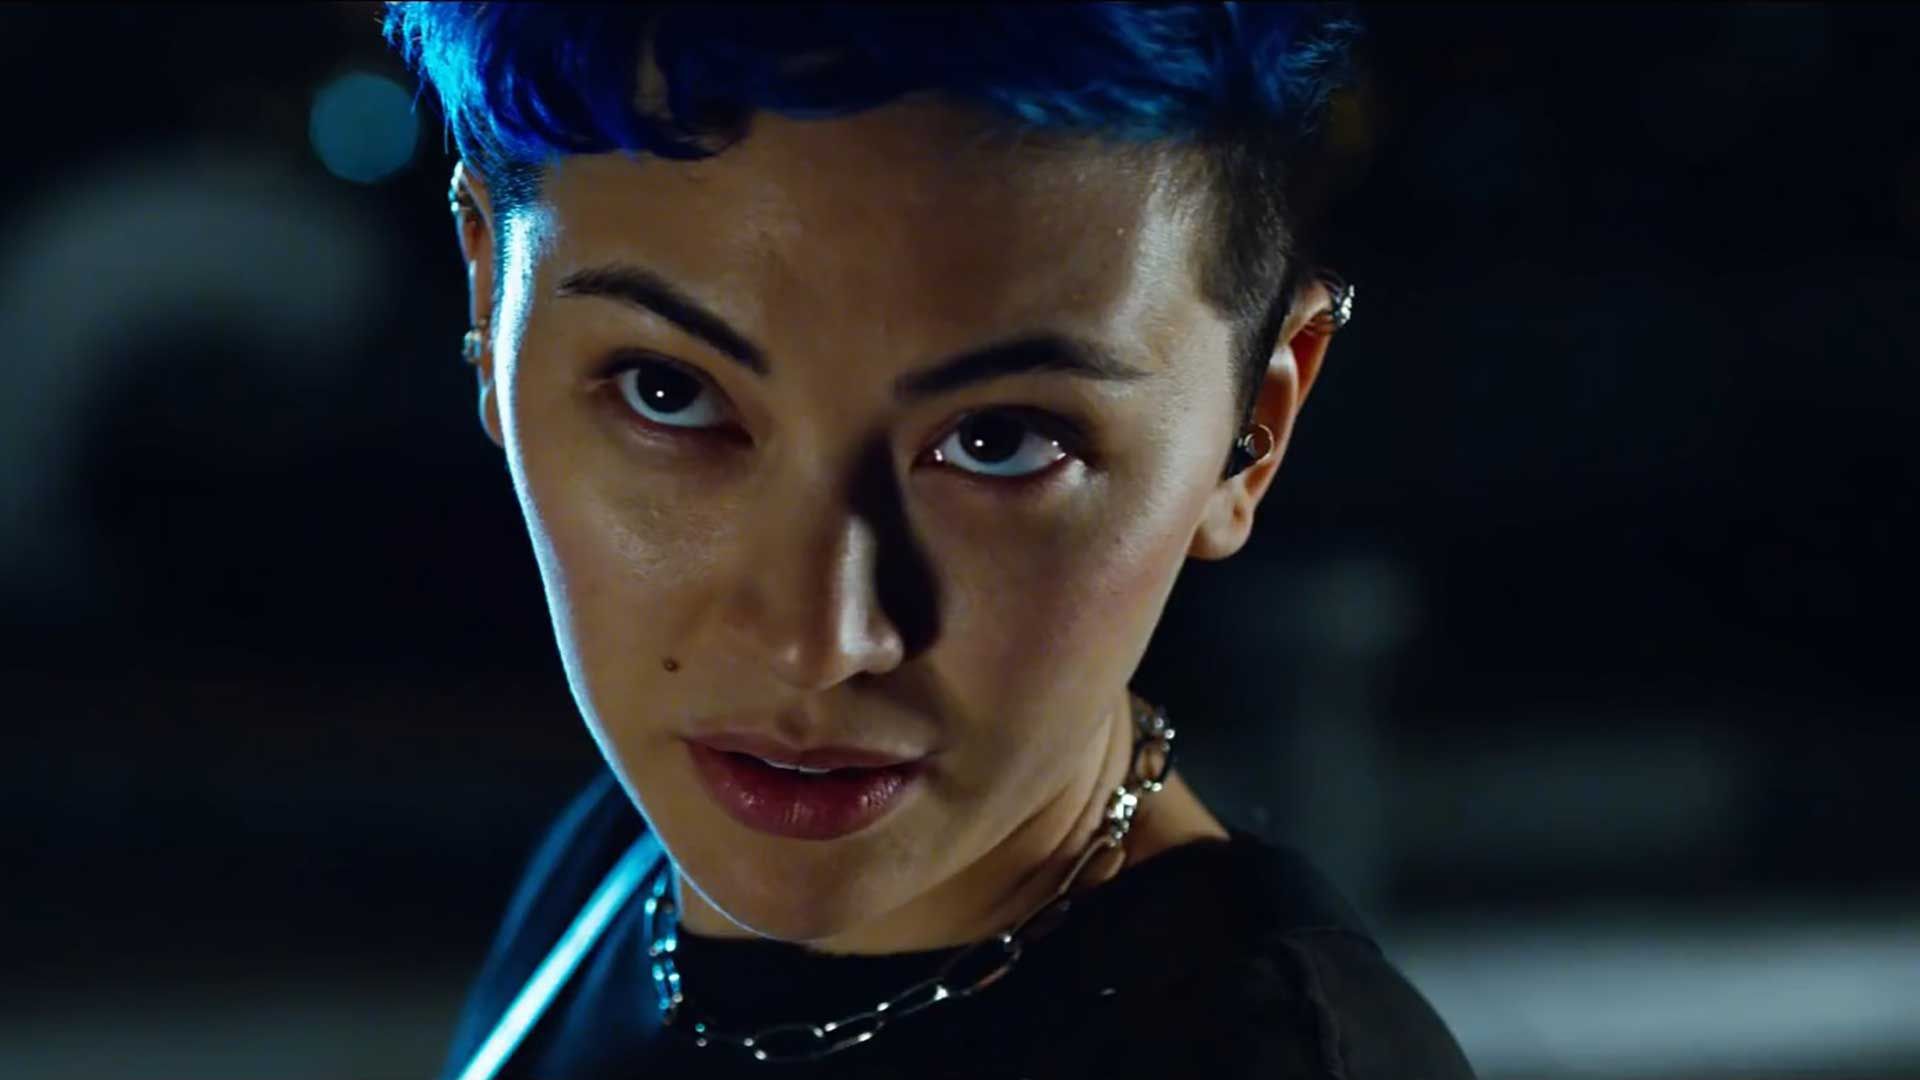 A still from the Matrix Resurrections shows Jessica Henwick as Bugs a young British Asian woman with blue hair